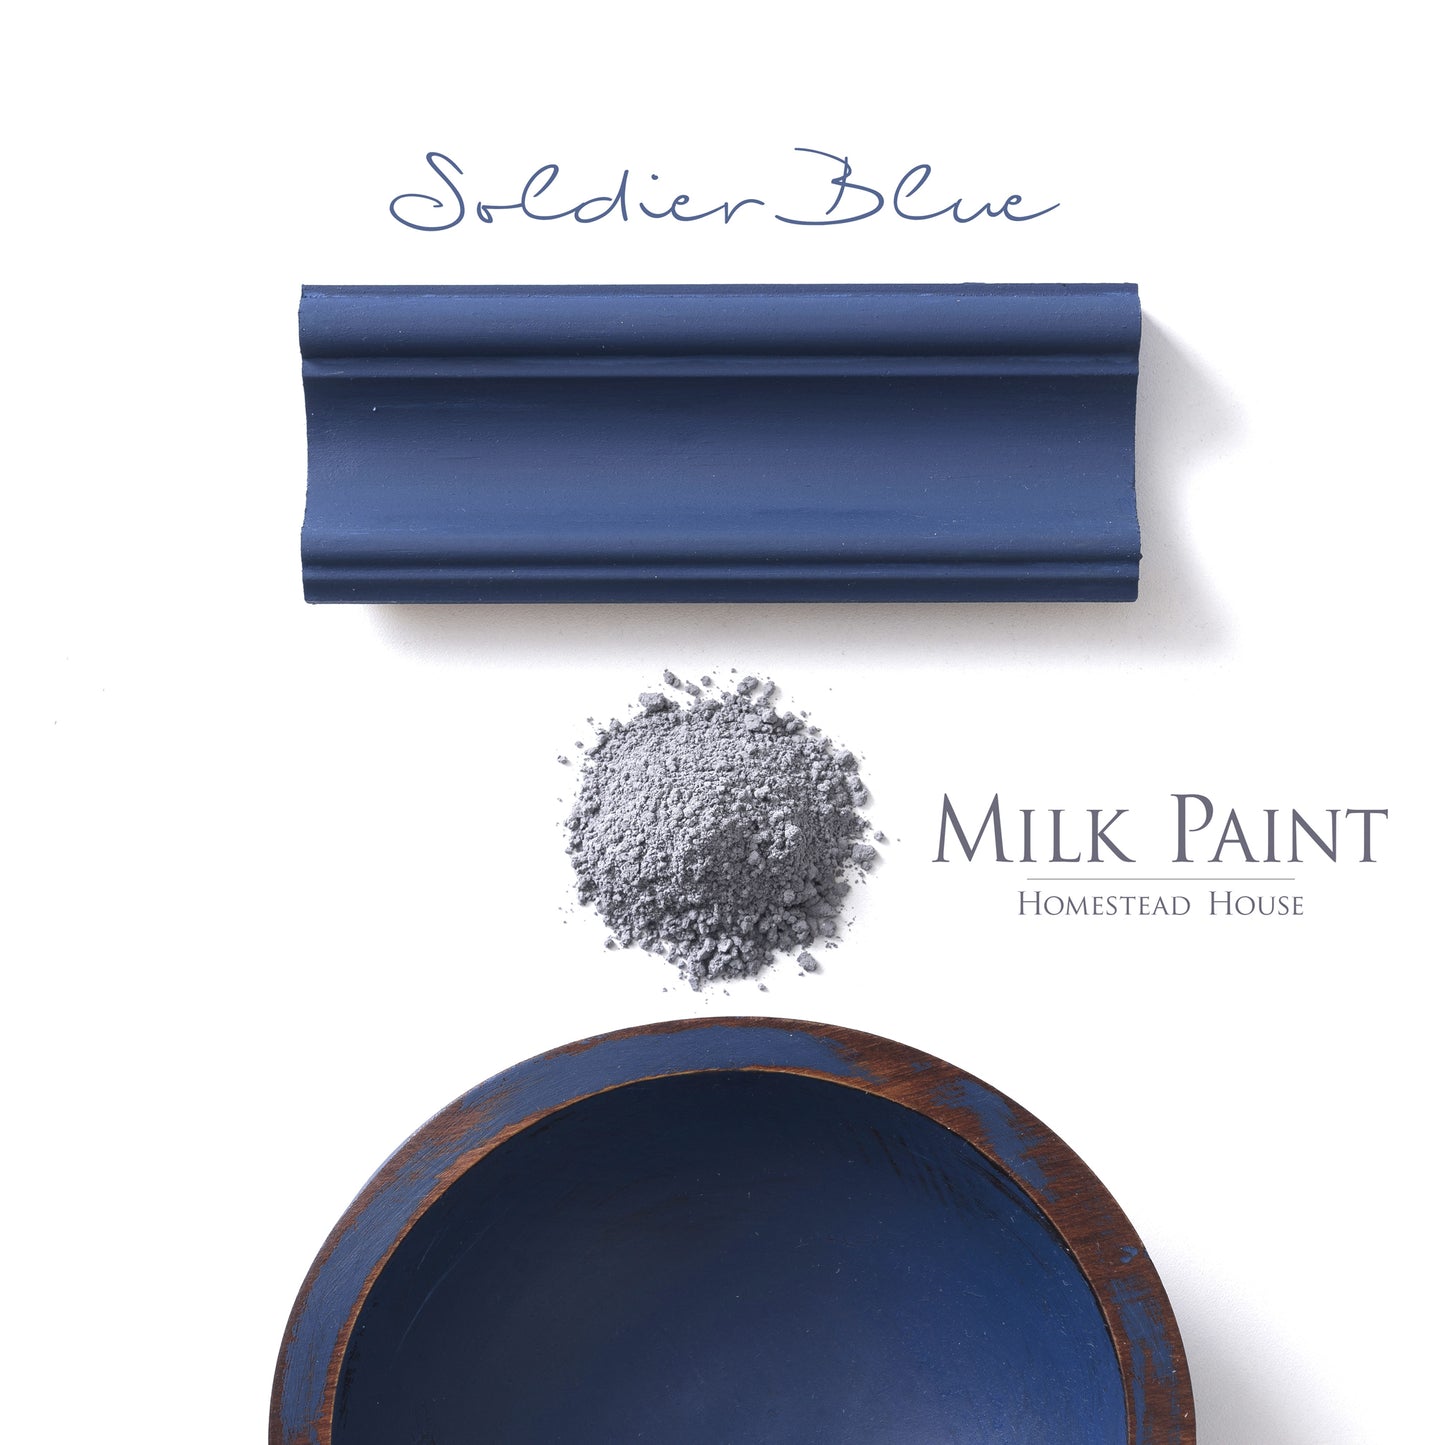 Milk Paint from Homestead House in Soldier Blue, deep rich true blue with a hint of black.  |  homesteadhouse.ca